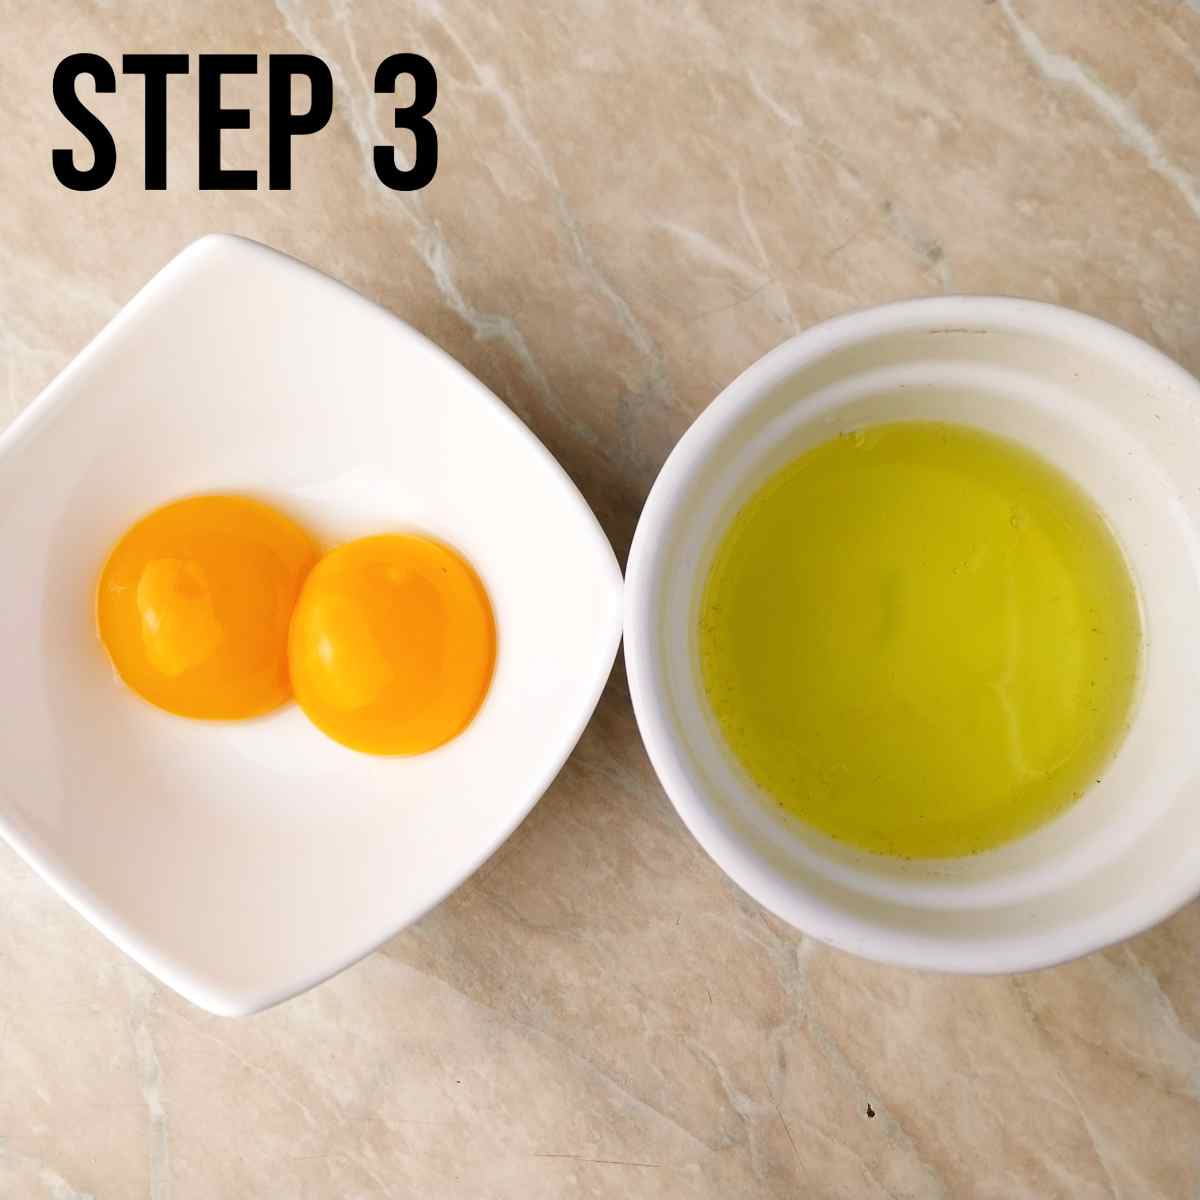 Separating the egg yolks from the whites.